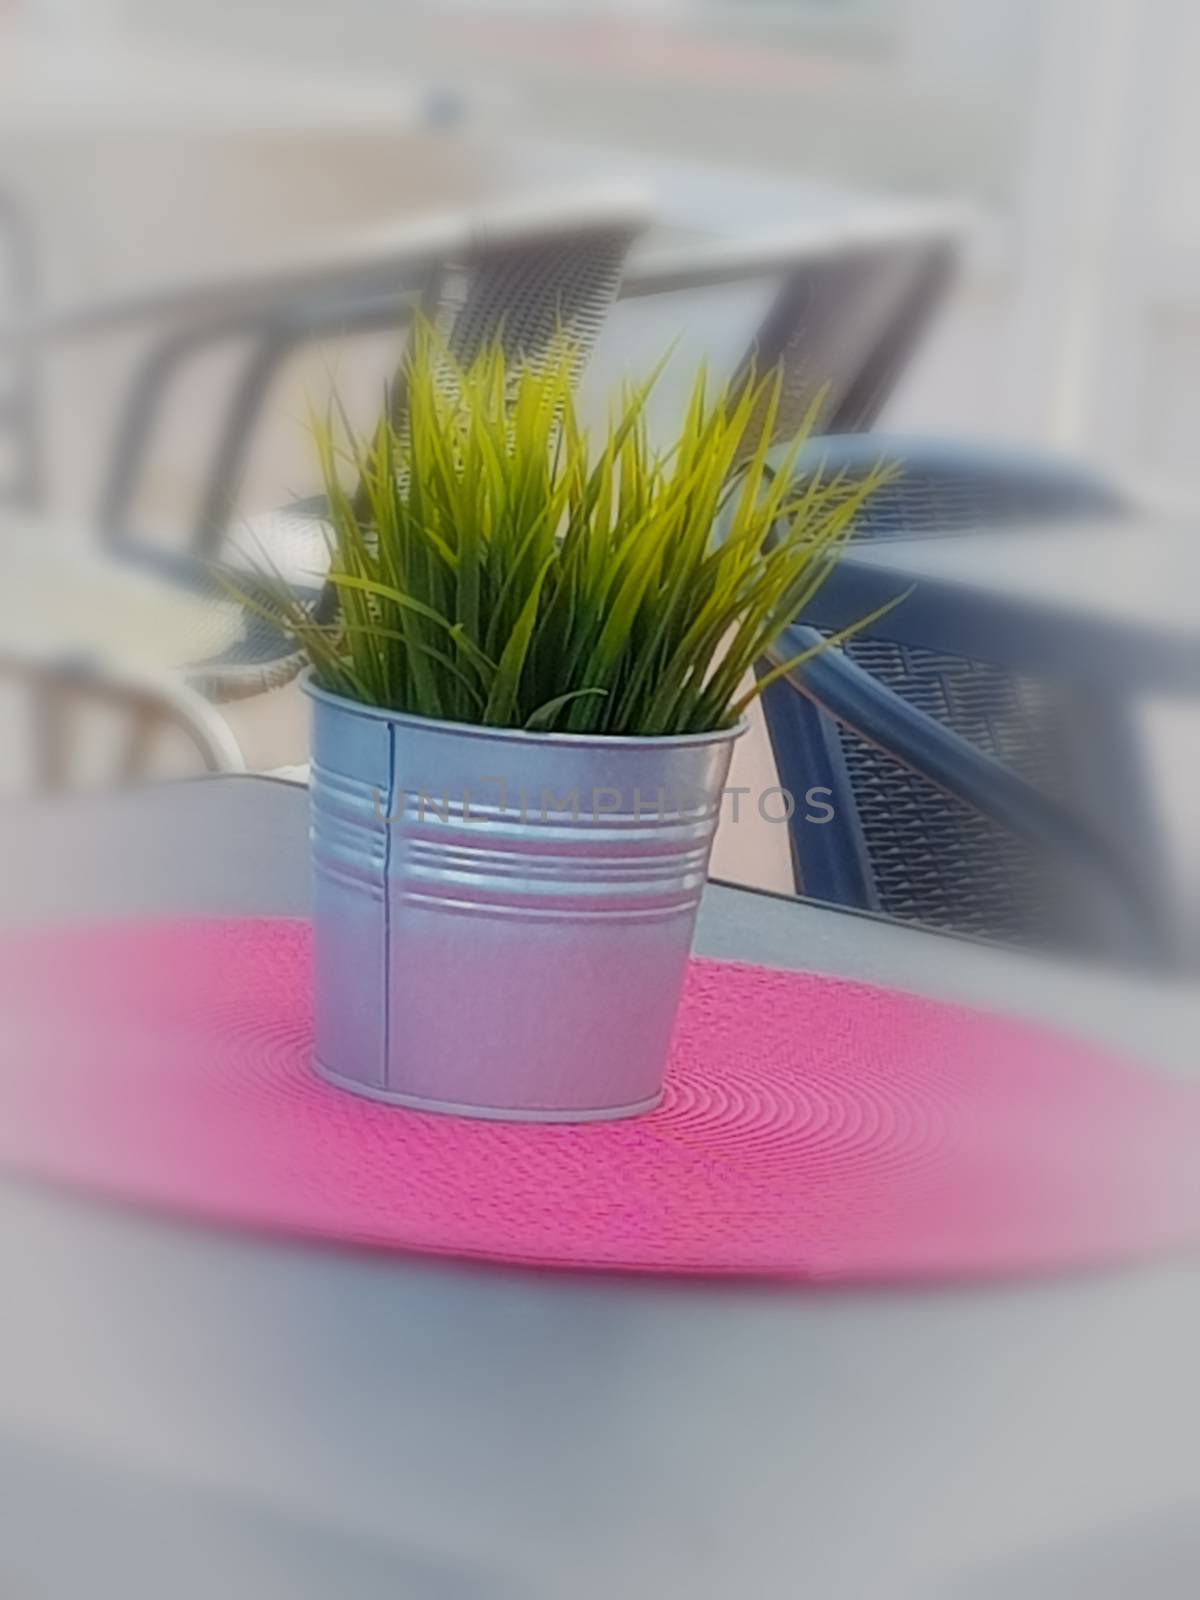 Flowerpot on a table                     by JFsPic